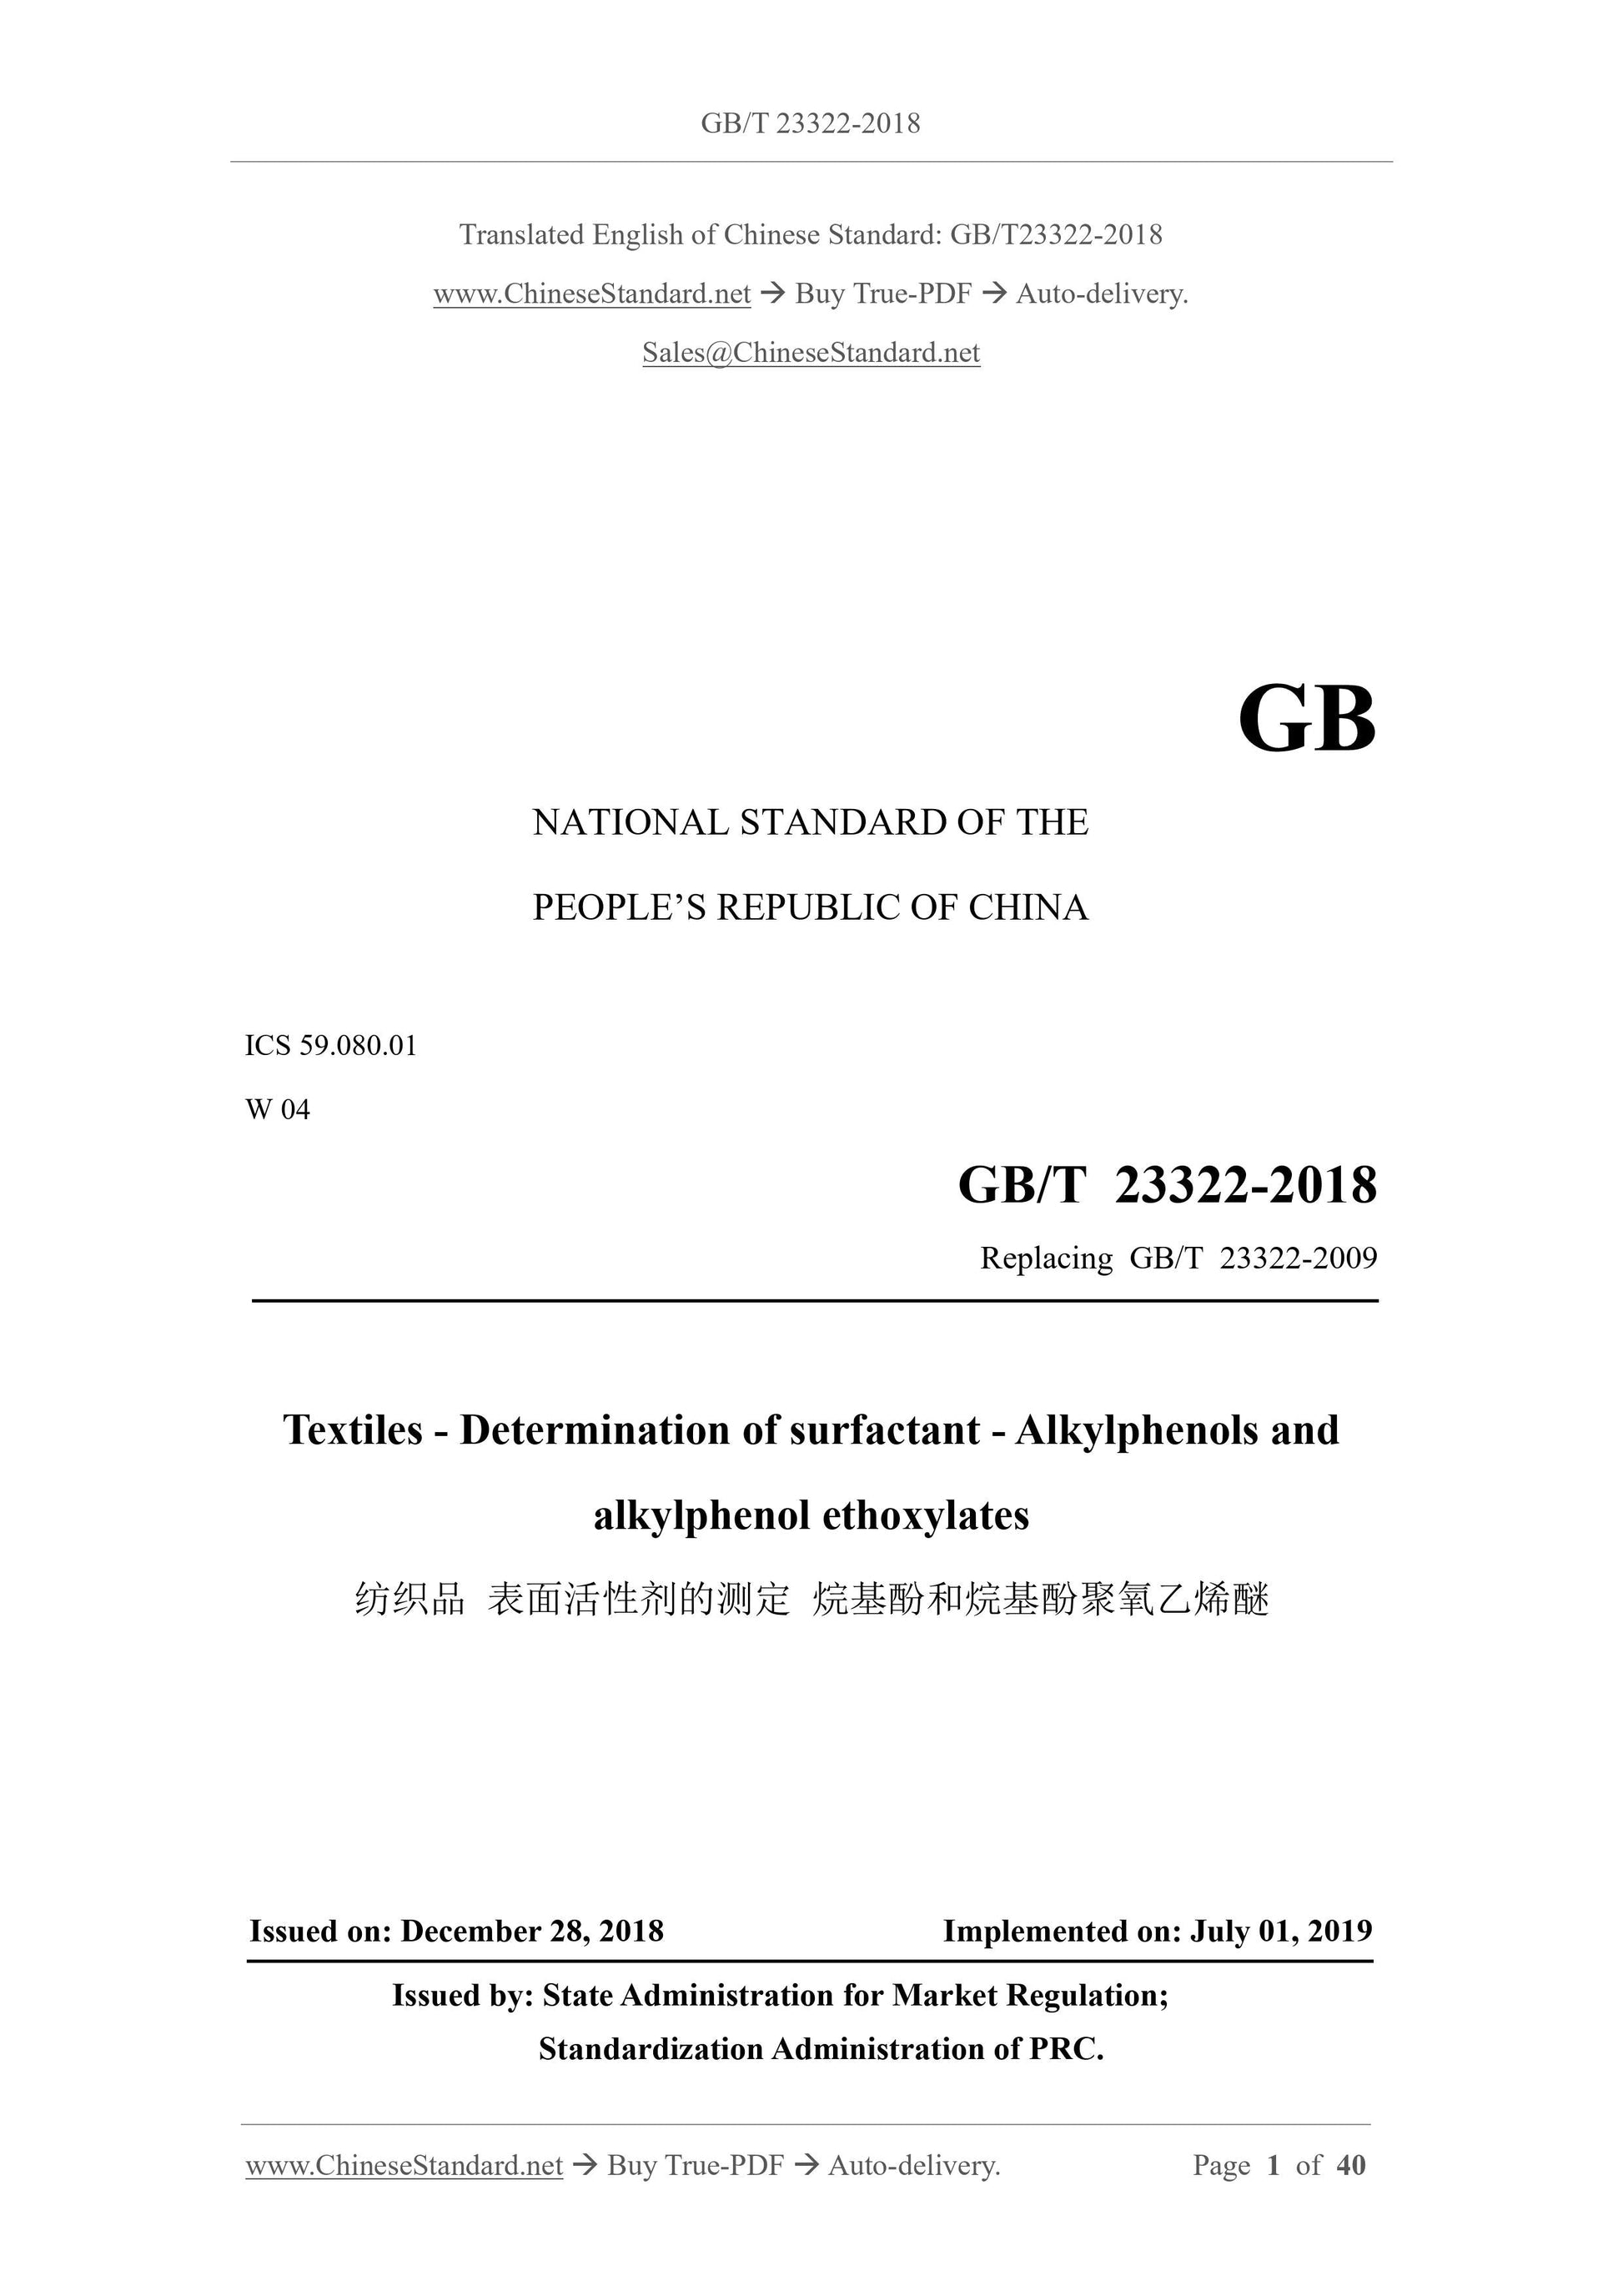 GB/T 23322-2018 Page 1